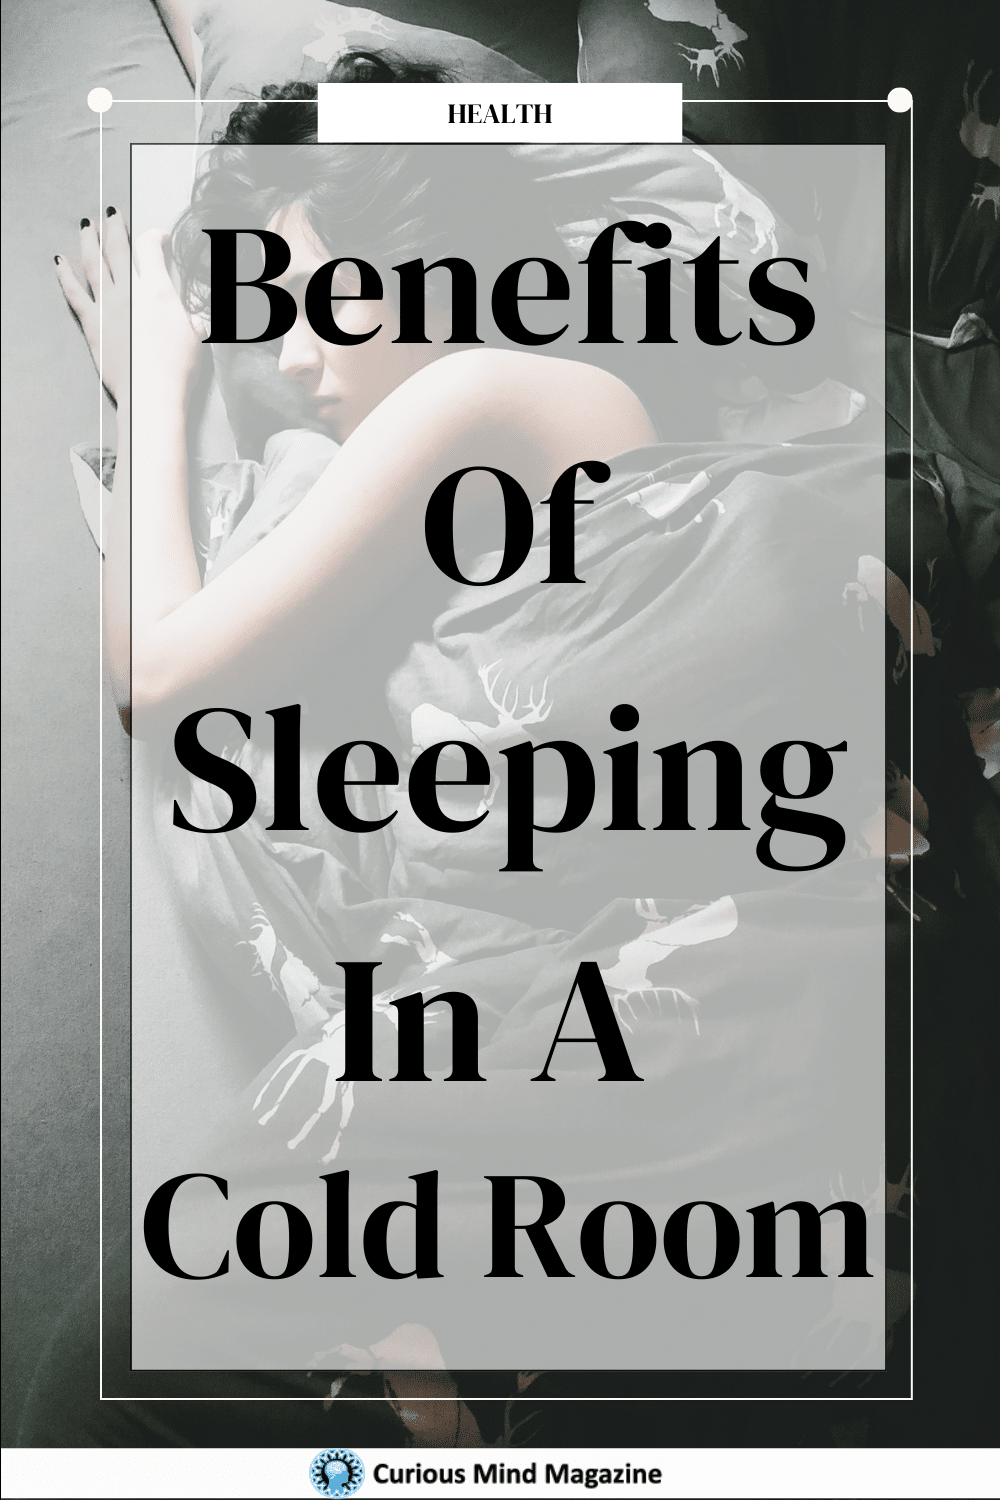 Benefits of sleeping in a cold room